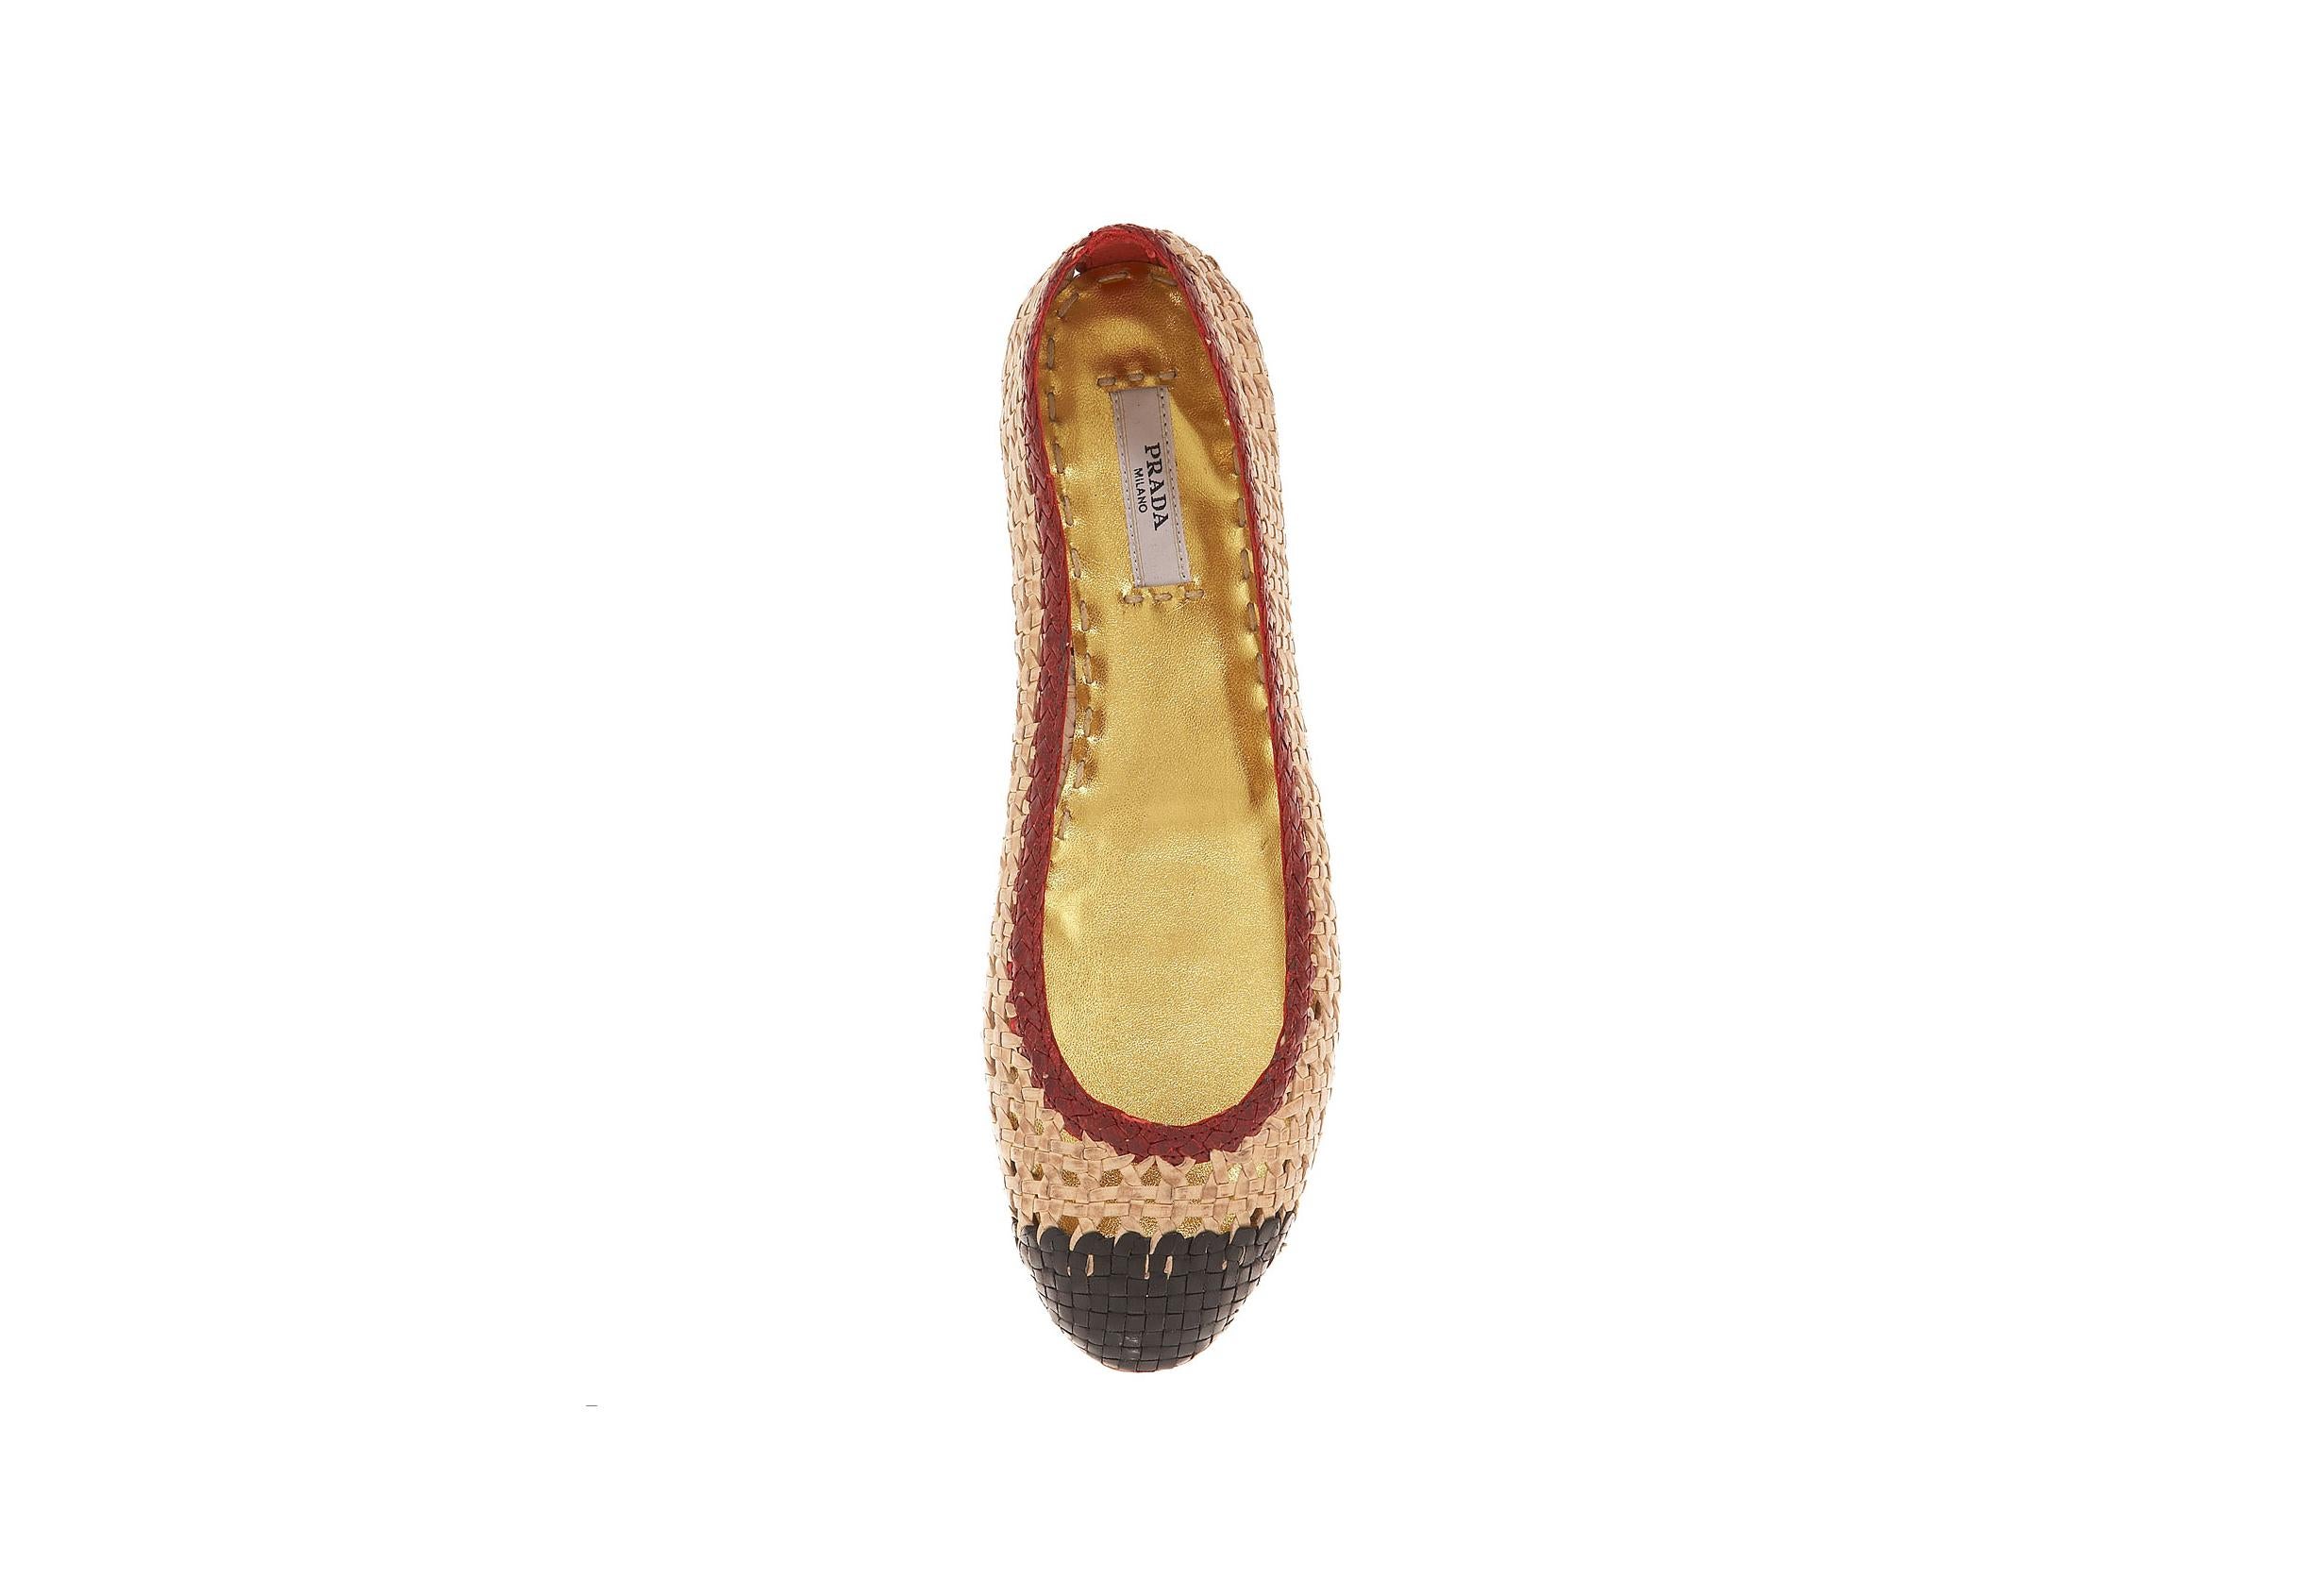     A PRADA signature piece and timeless classic that will last you for years
    Beautiful woven design in tri-color
    Gold-metallic leather lining
    Outer sole in real leather
    From PRADA's luxurious collection - all hand-woven!
    Pure